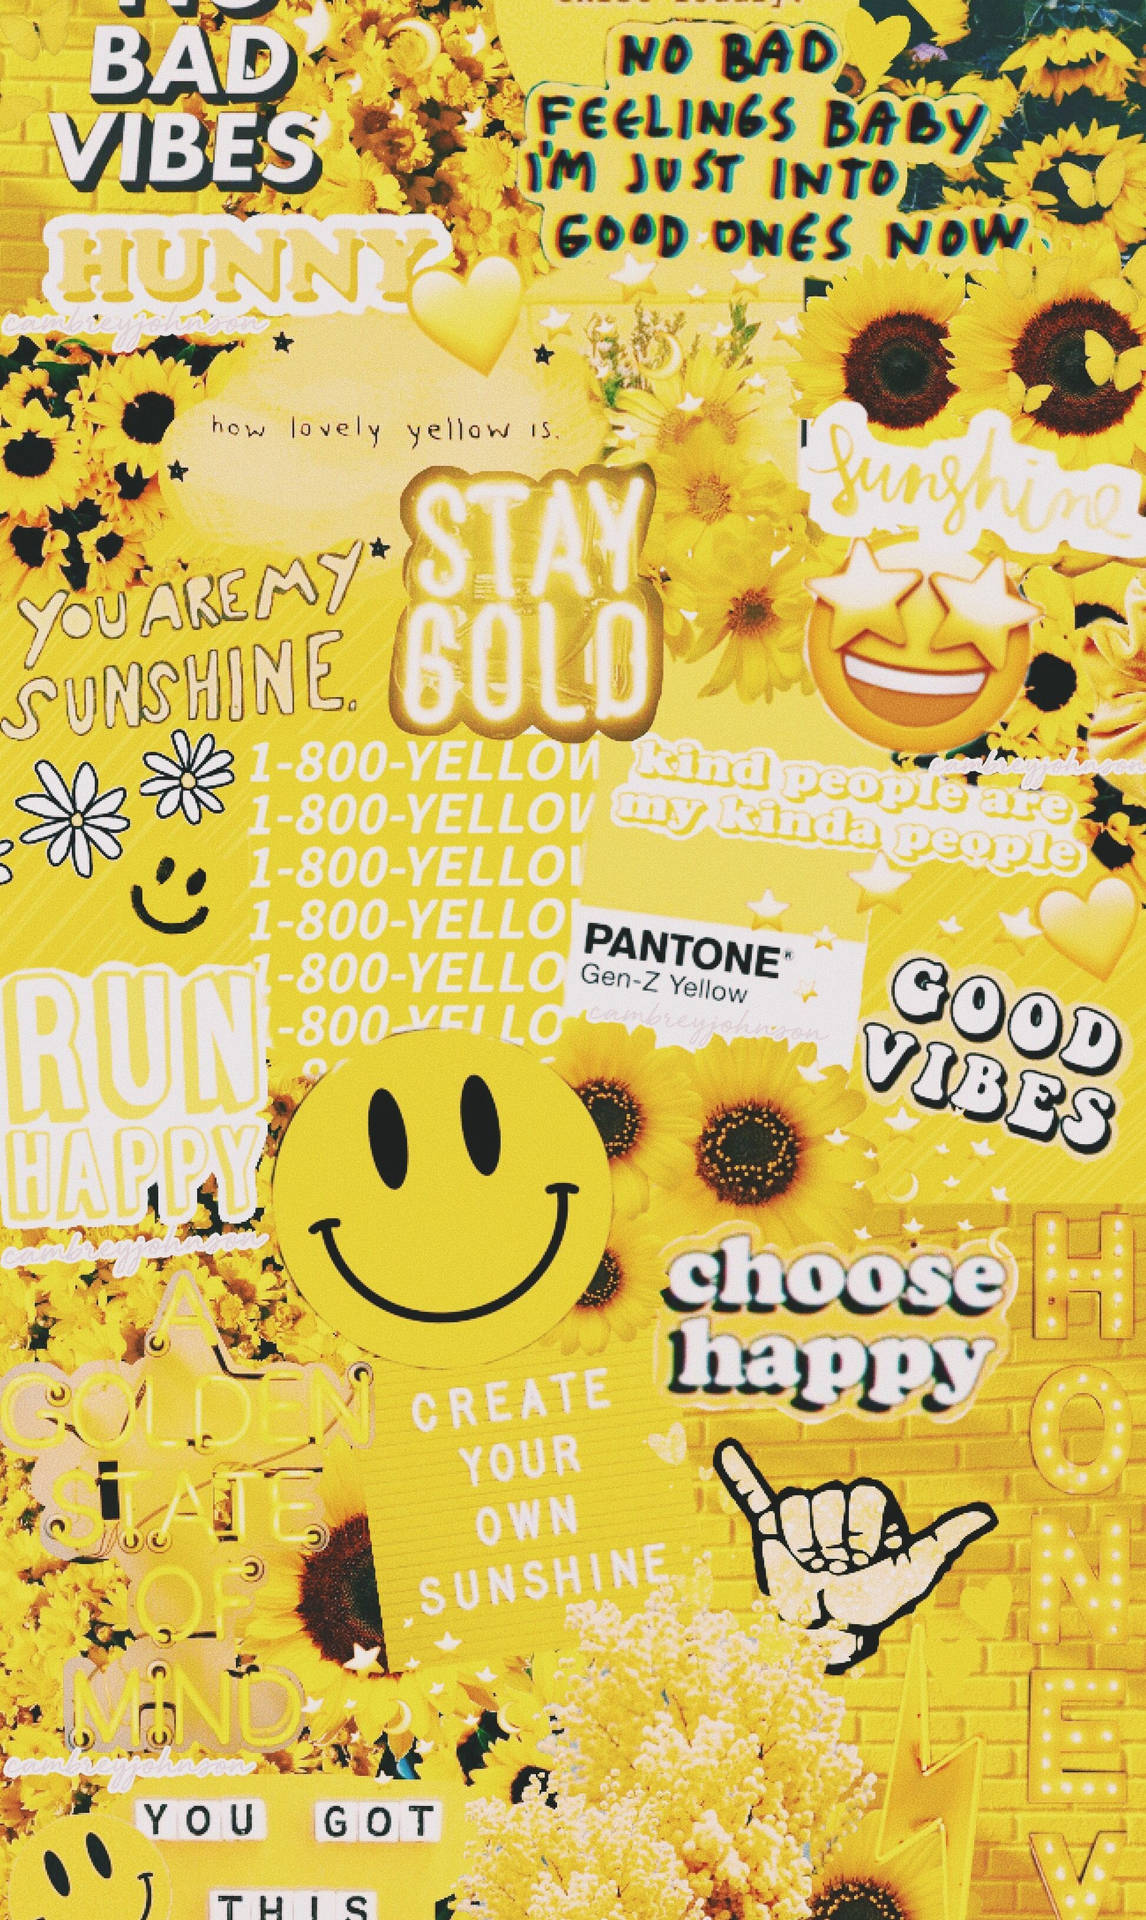 Brighten Up Your Day With This Fun And Cheerful Cute Yellow Aesthetic! Background